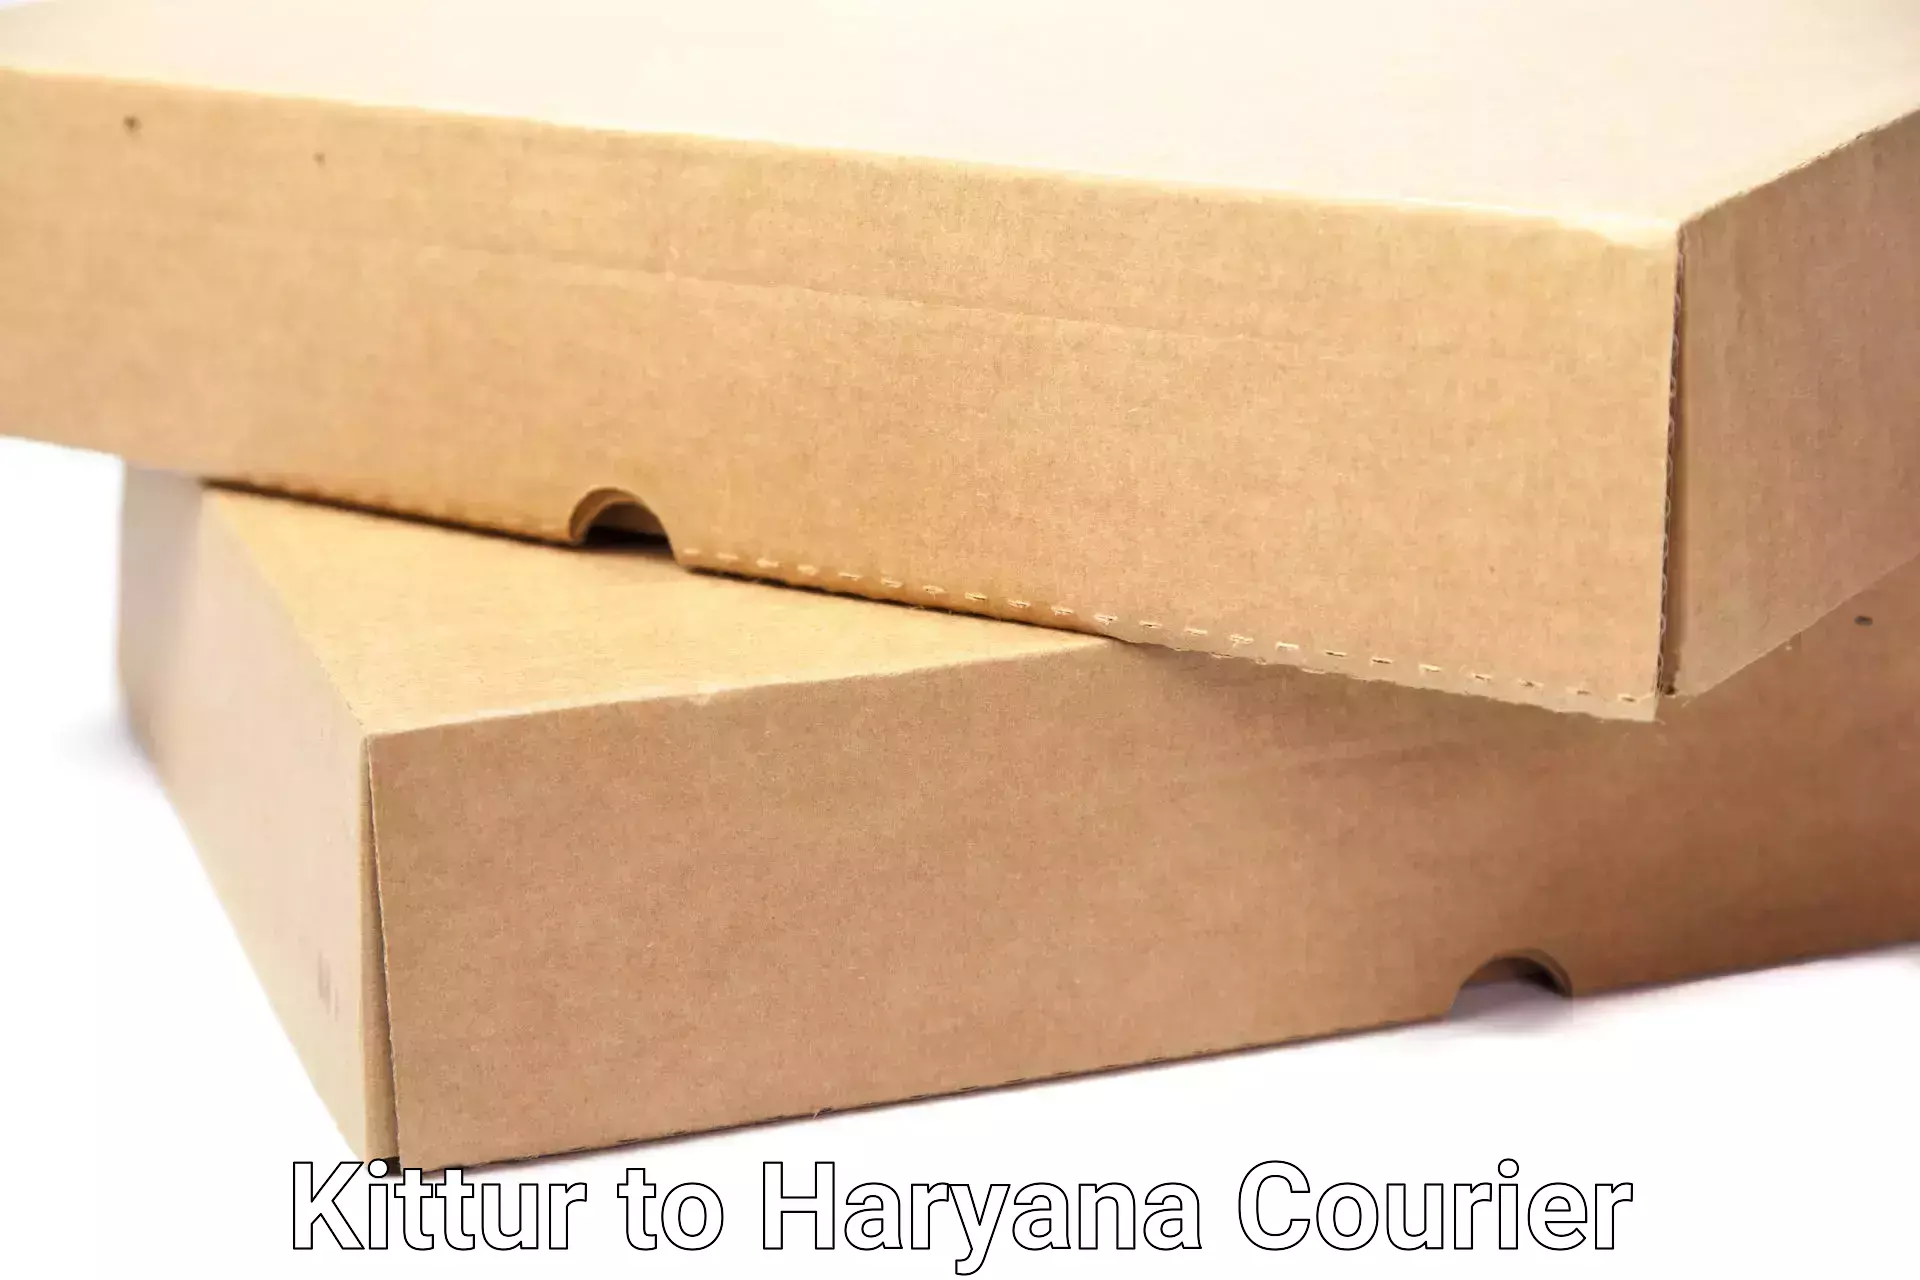 Comprehensive moving assistance in Kittur to Haryana